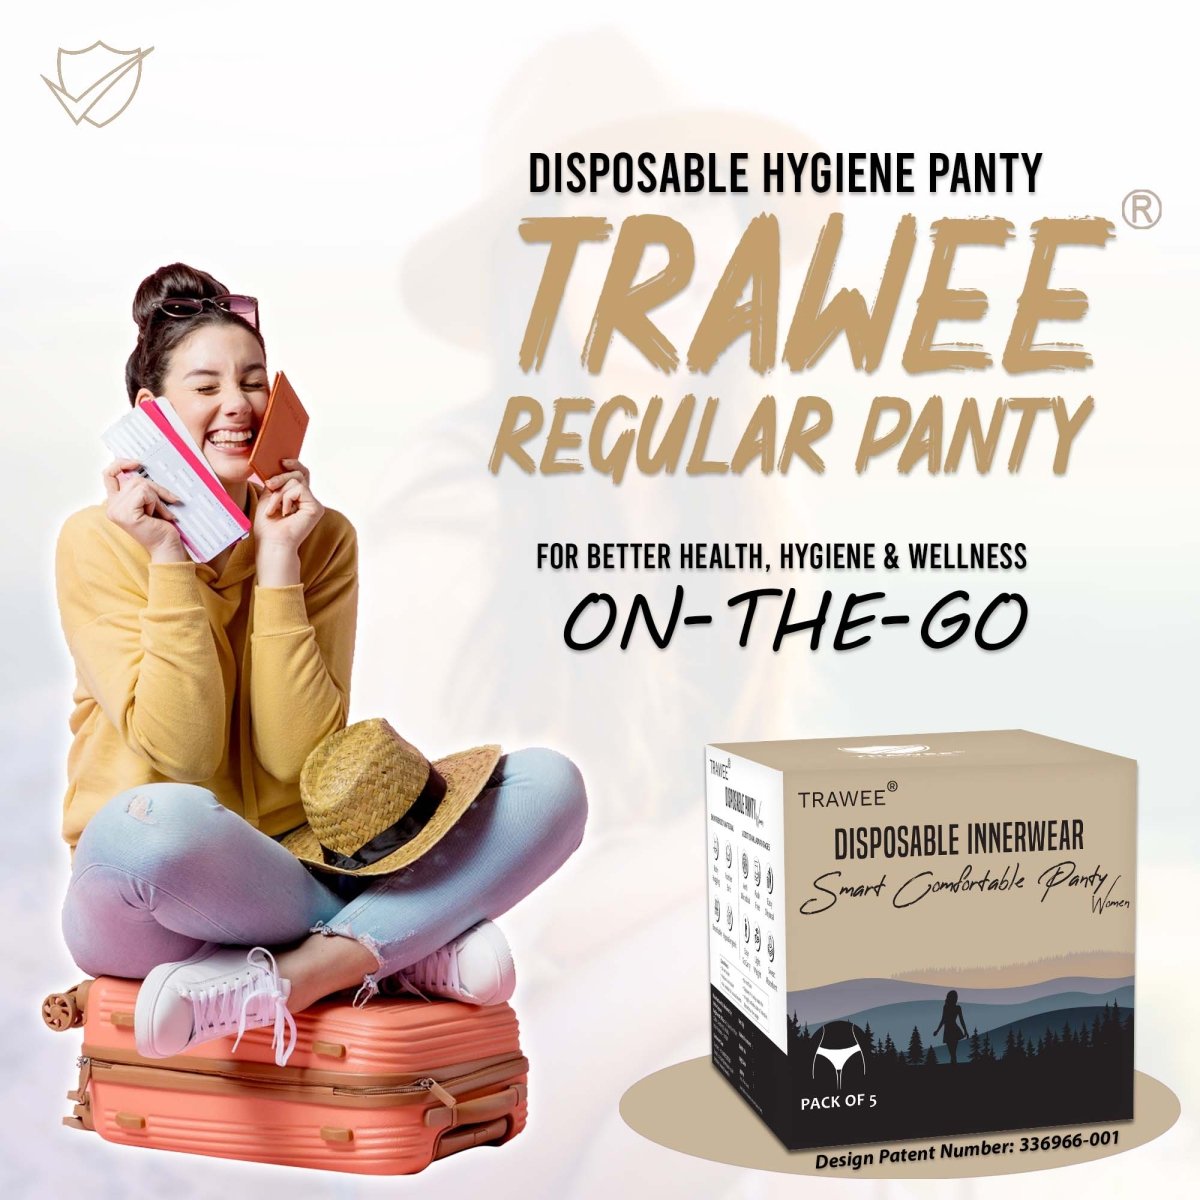 Trawee Travel Disposable Panty for Comfort & Versatility, 6 Sizes Pack of 5 - TF001A-0XS